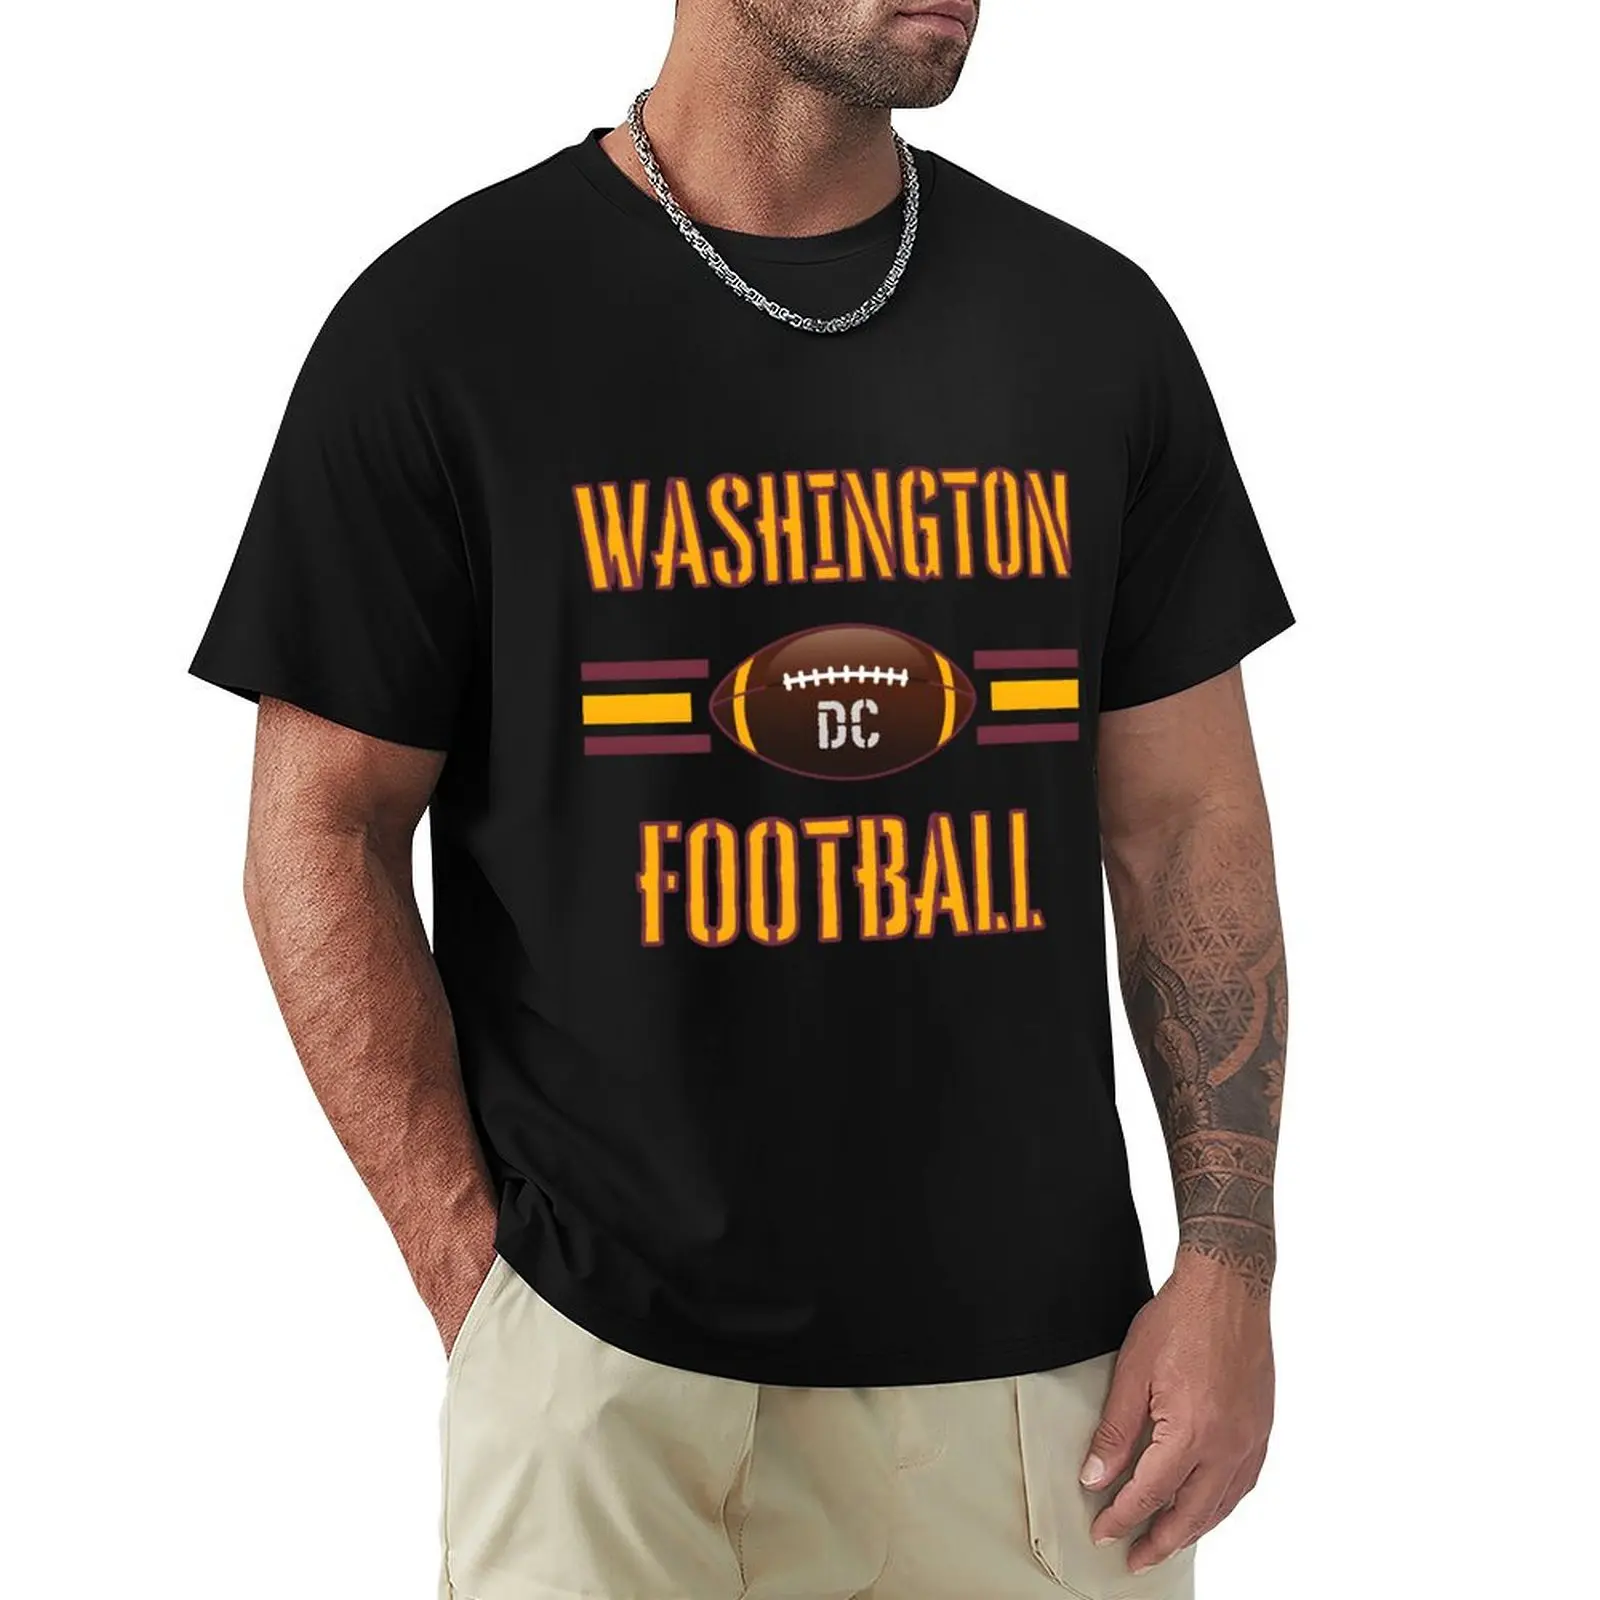 

Washington Football 2021 v2 (Black) Sports Jersey Fitted \t \t\t T-Shirt cute clothes animal prinfor boys funnys Men's clothing